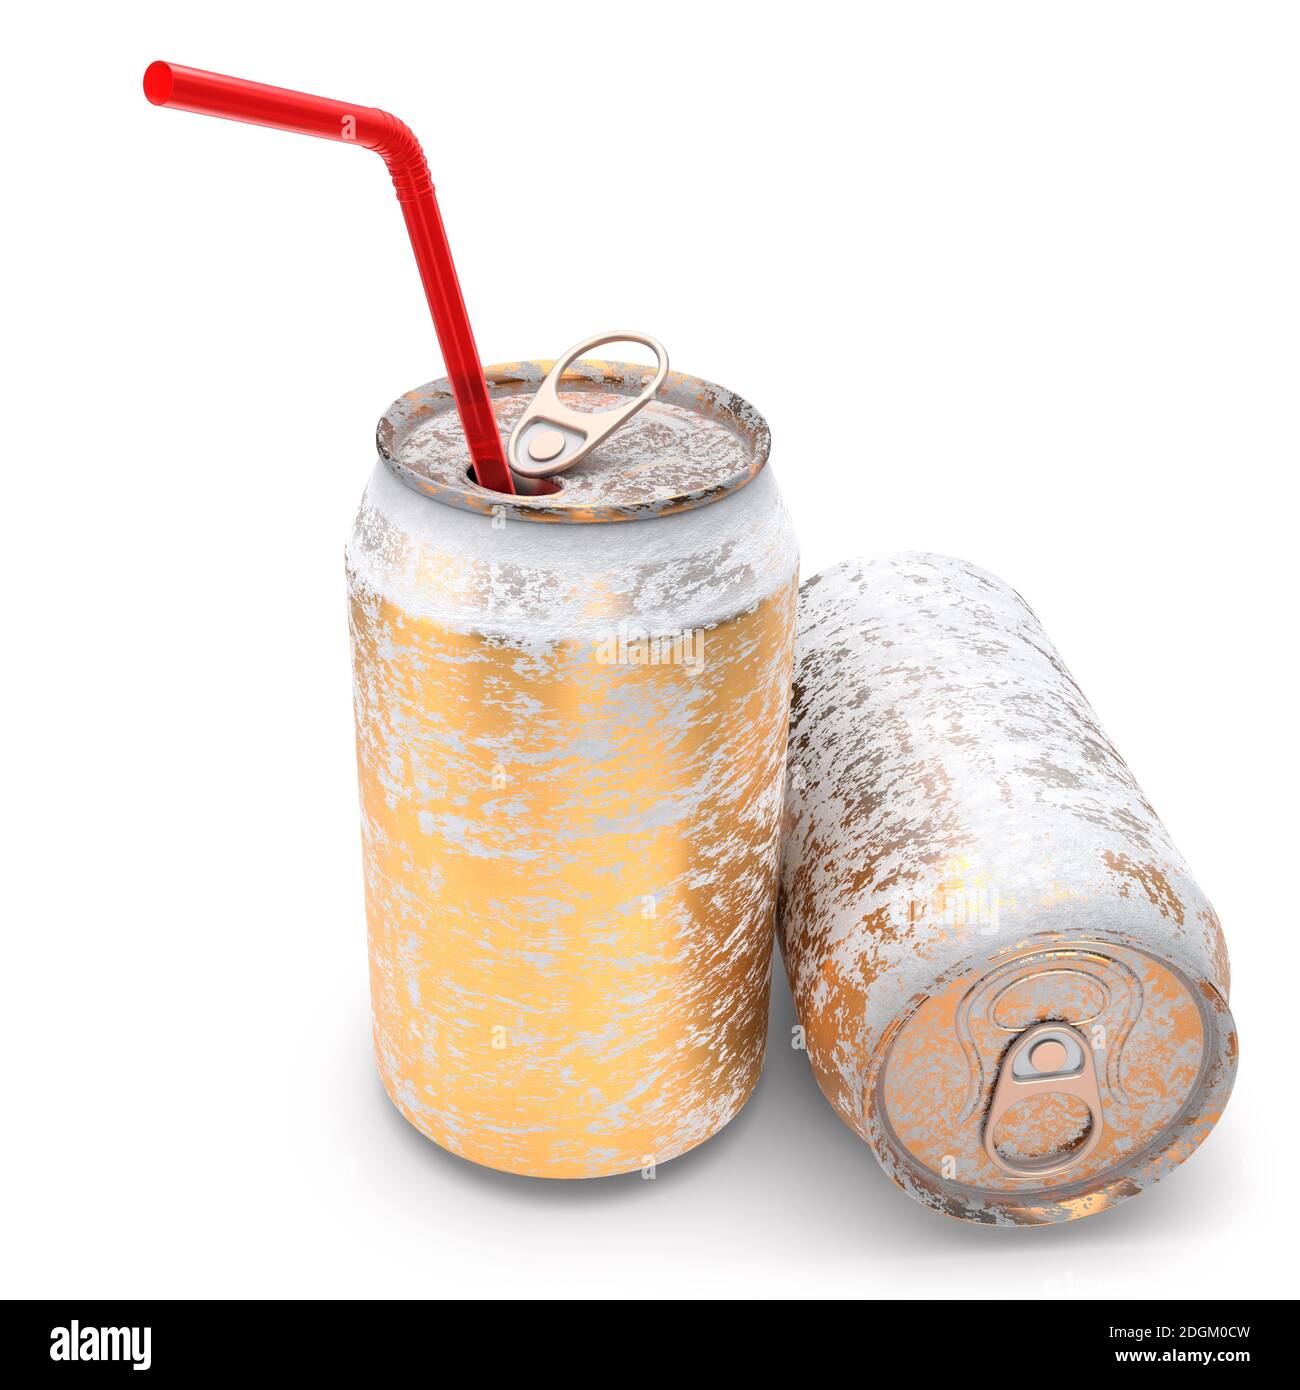 https://c8.alamy.com/comp/2DGM0CW/gold-frozen-aluminum-beer-or-soda-cans-with-red-straw-isolated-on-white-2DGM0CW.jpg